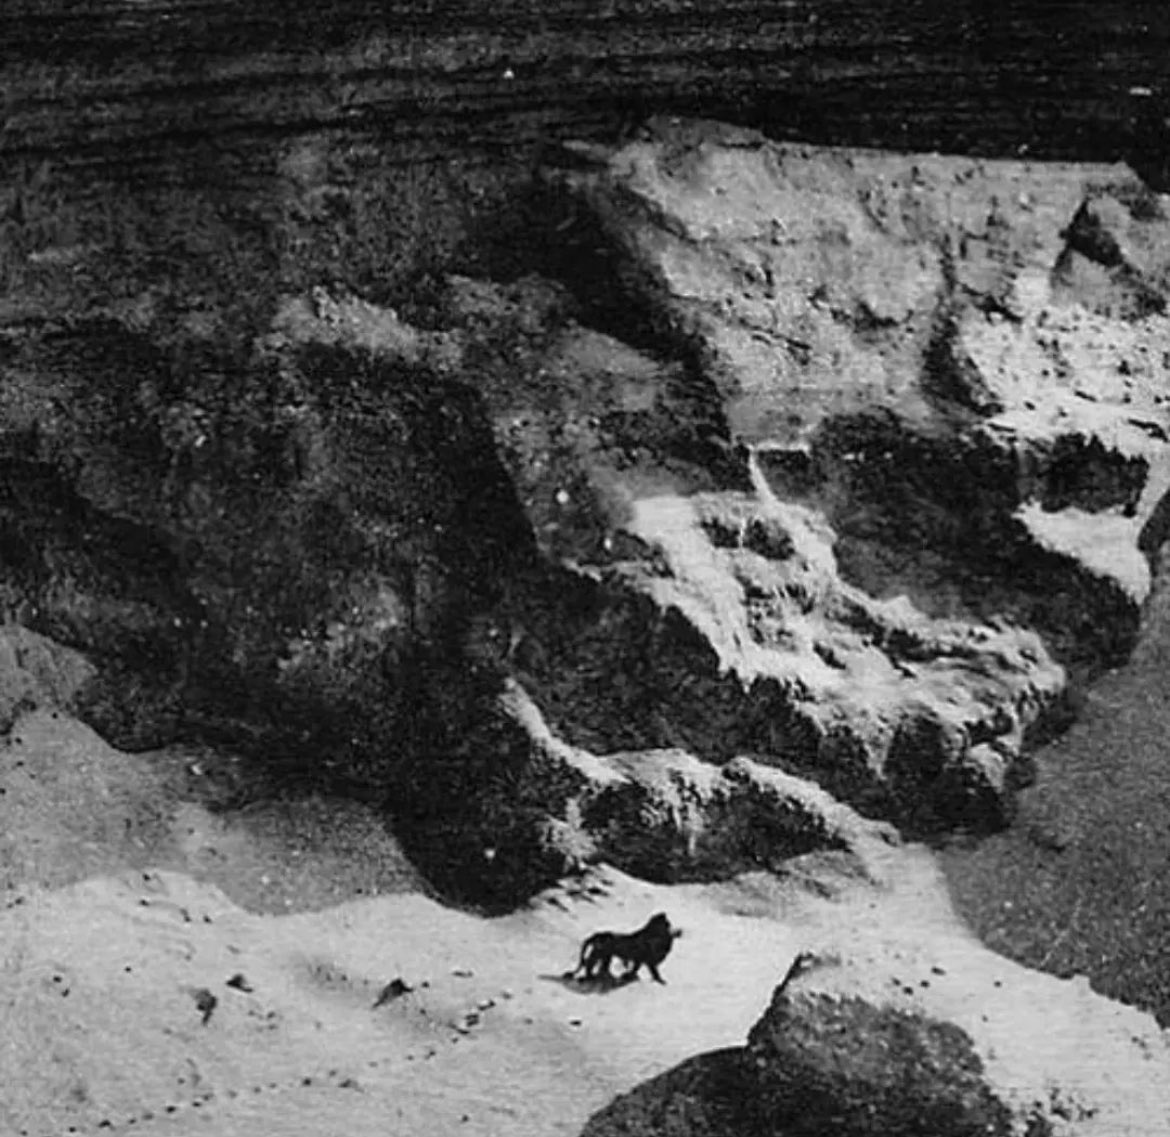 In this 1925 photograph captured by French photographer Marcelin Flandrin during a flight on the Casablanca-Dakar air route, a lone lion traverses the desert, possibly one of the last Barbary lions in the wild before their extinction.

Barbary lions once roamed the expansive…